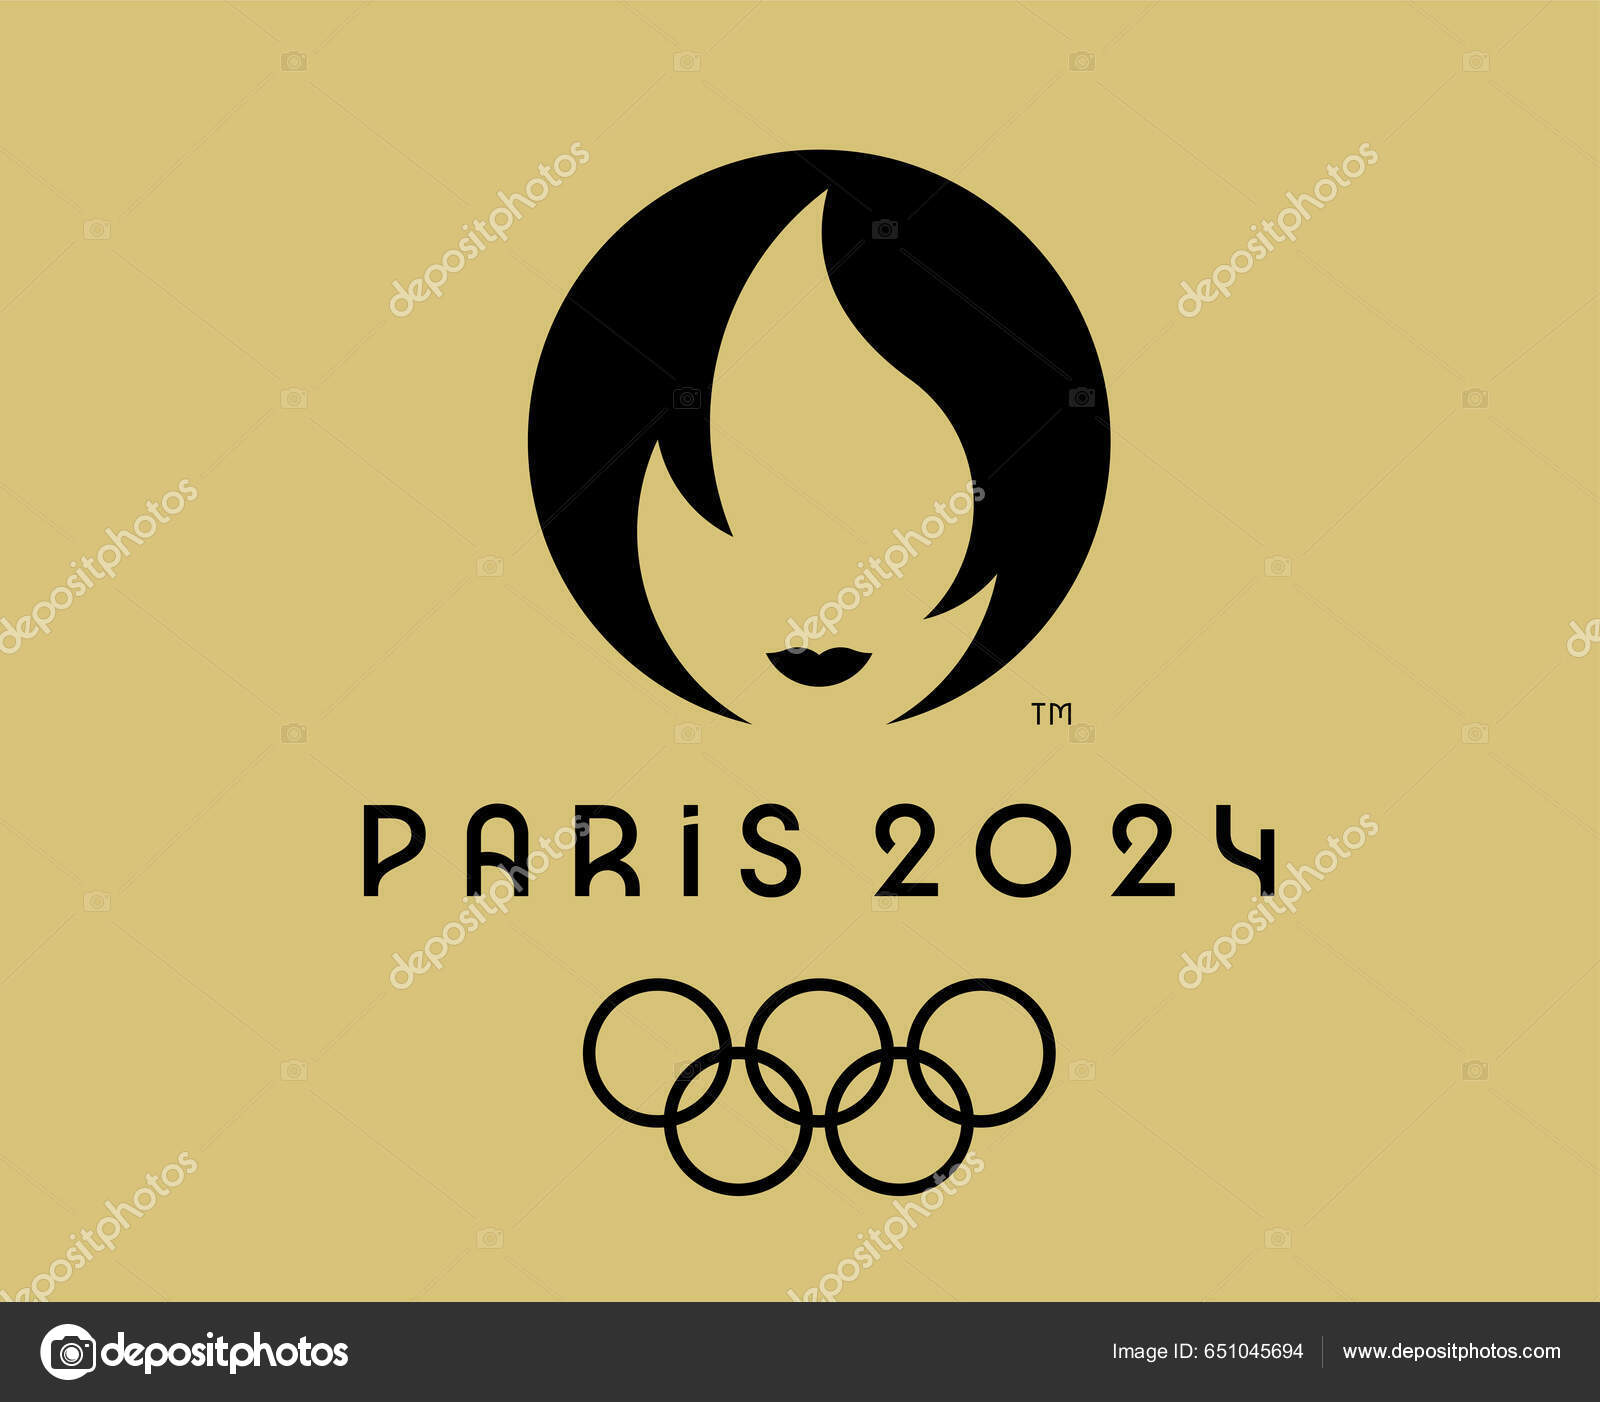 Paris 2024 Olympic Games Official Logo Black Symbol Abstract Design